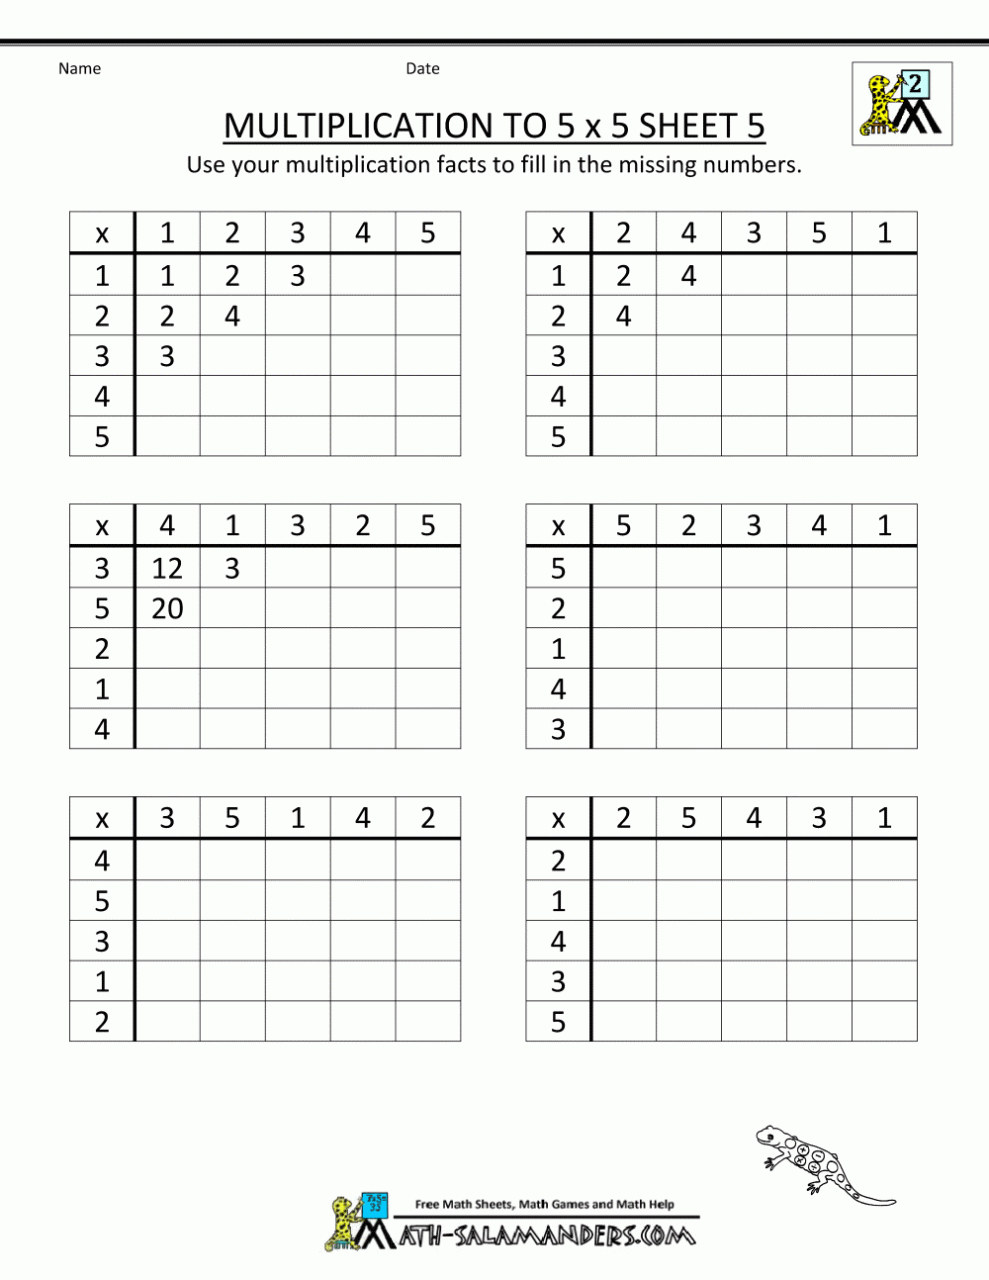 Multiplication to 5x5 Worksheets for 2nd Grade